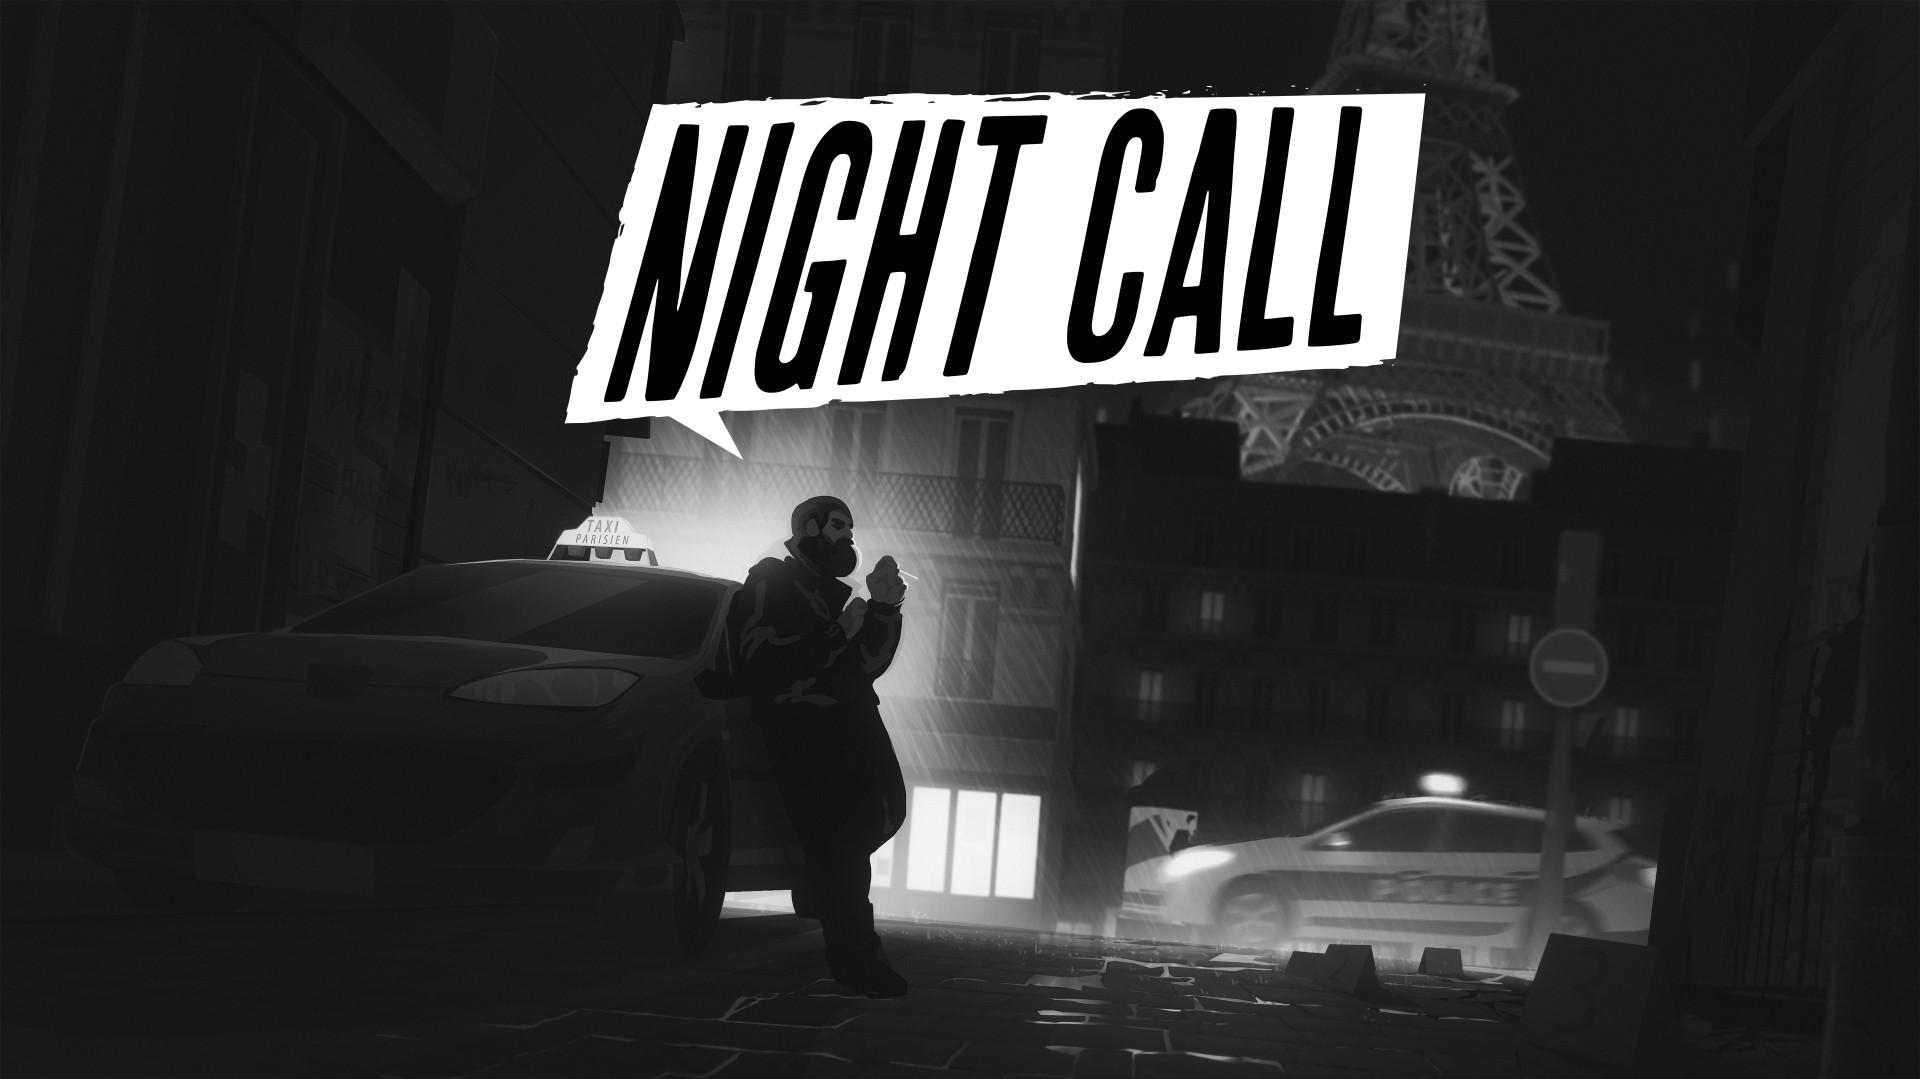 Welcome to Paris Night Call is Available Now with Xbox Game Pass